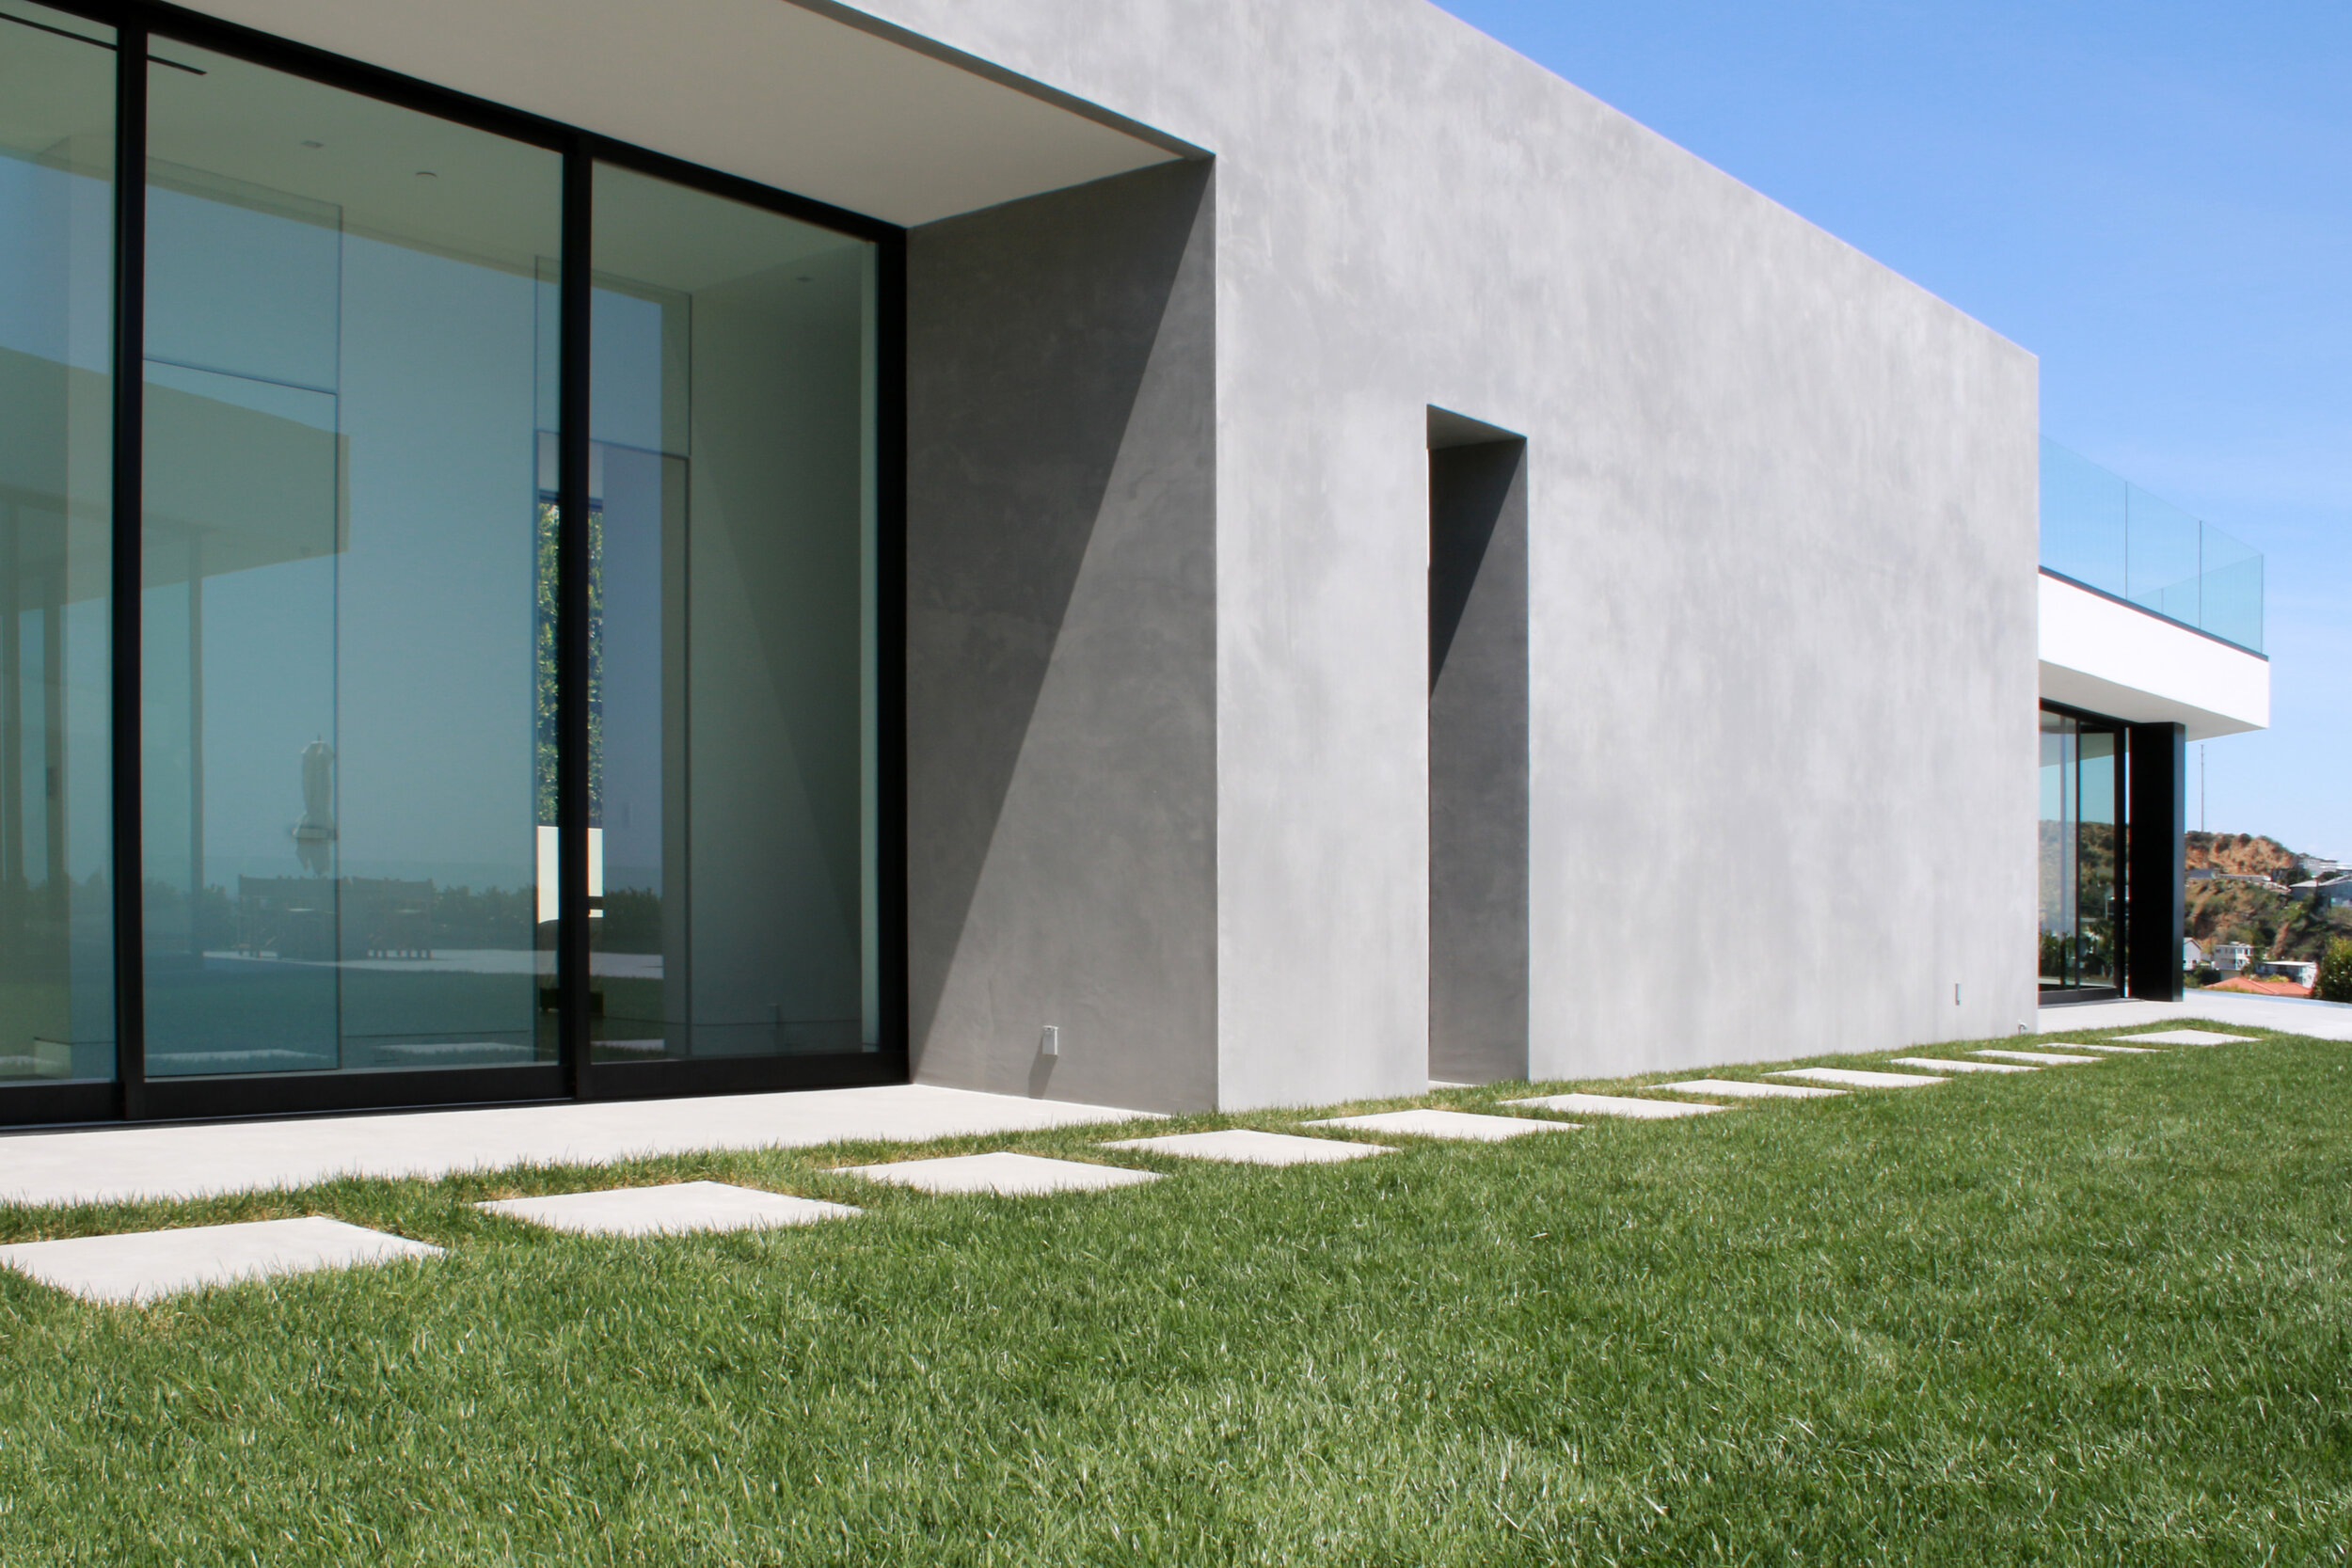 X-Bond Microcement Installed to house facade